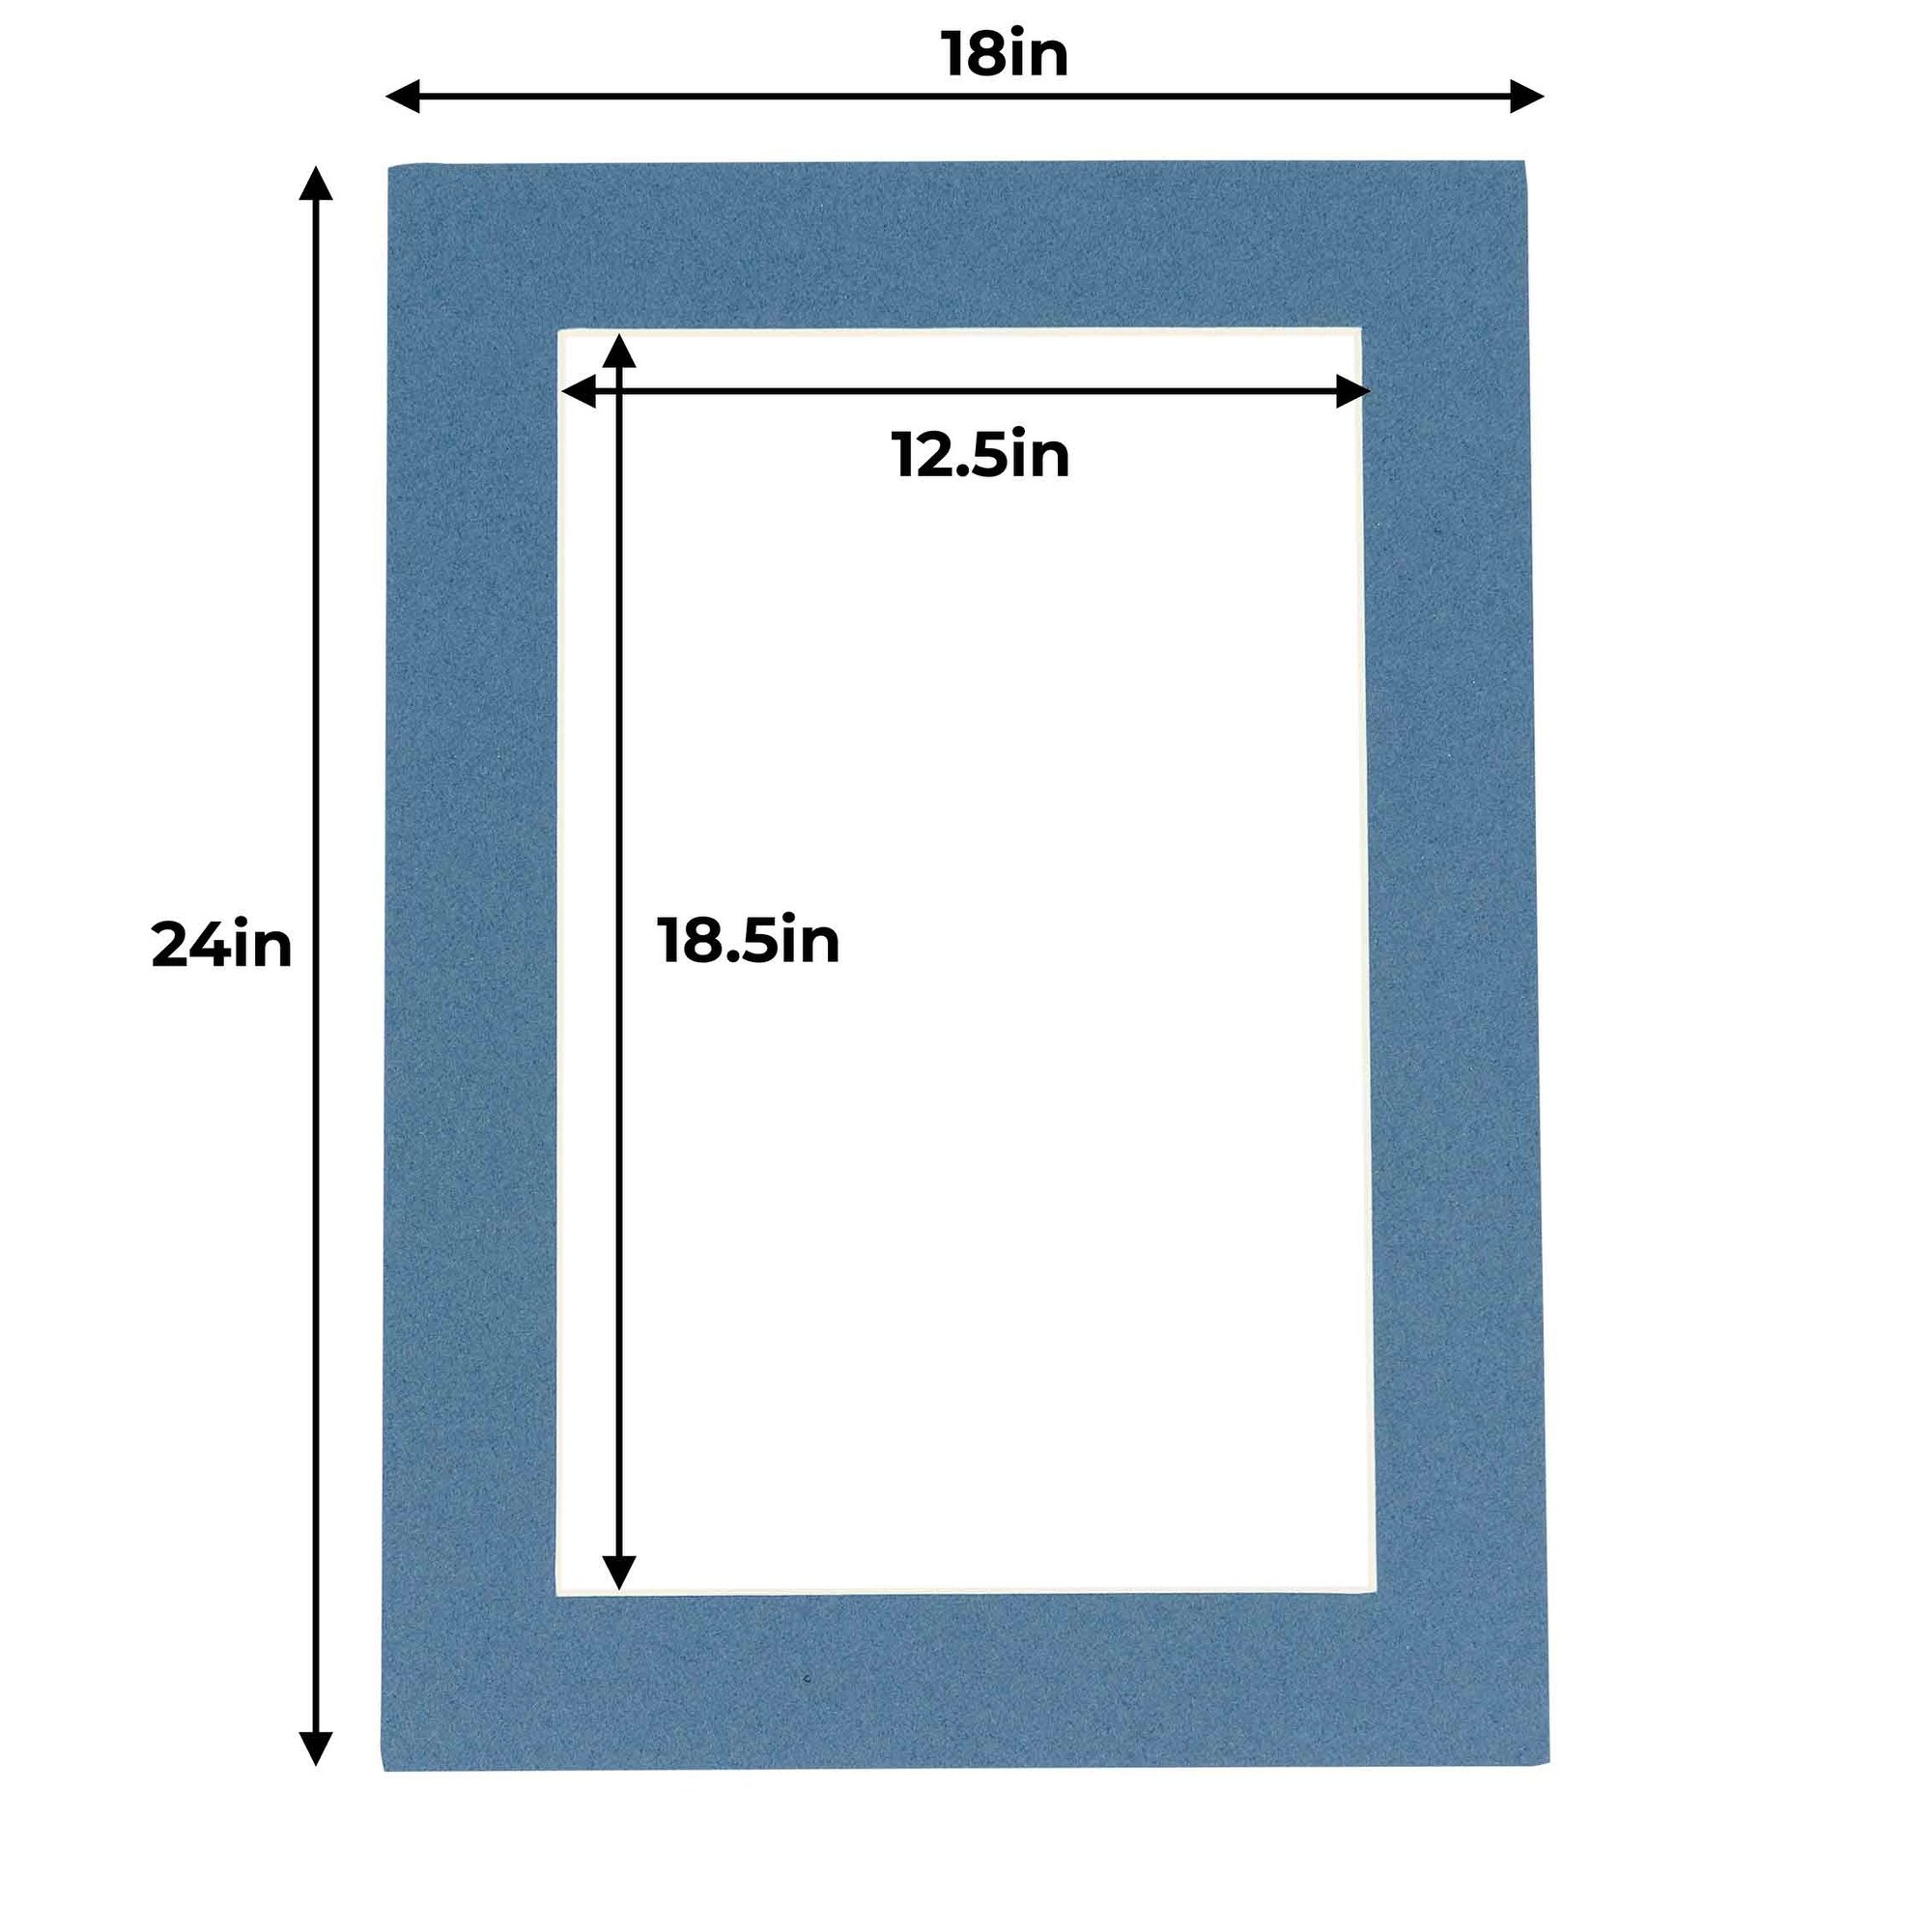  18x24 Mat for 13x19 Photo - Precut Teal Blue Picture Matboard  for Frames Measuring 18 x 24 Inches - Bevel Cut Matte to Display Art  Measuring 13 x 19 Inches 